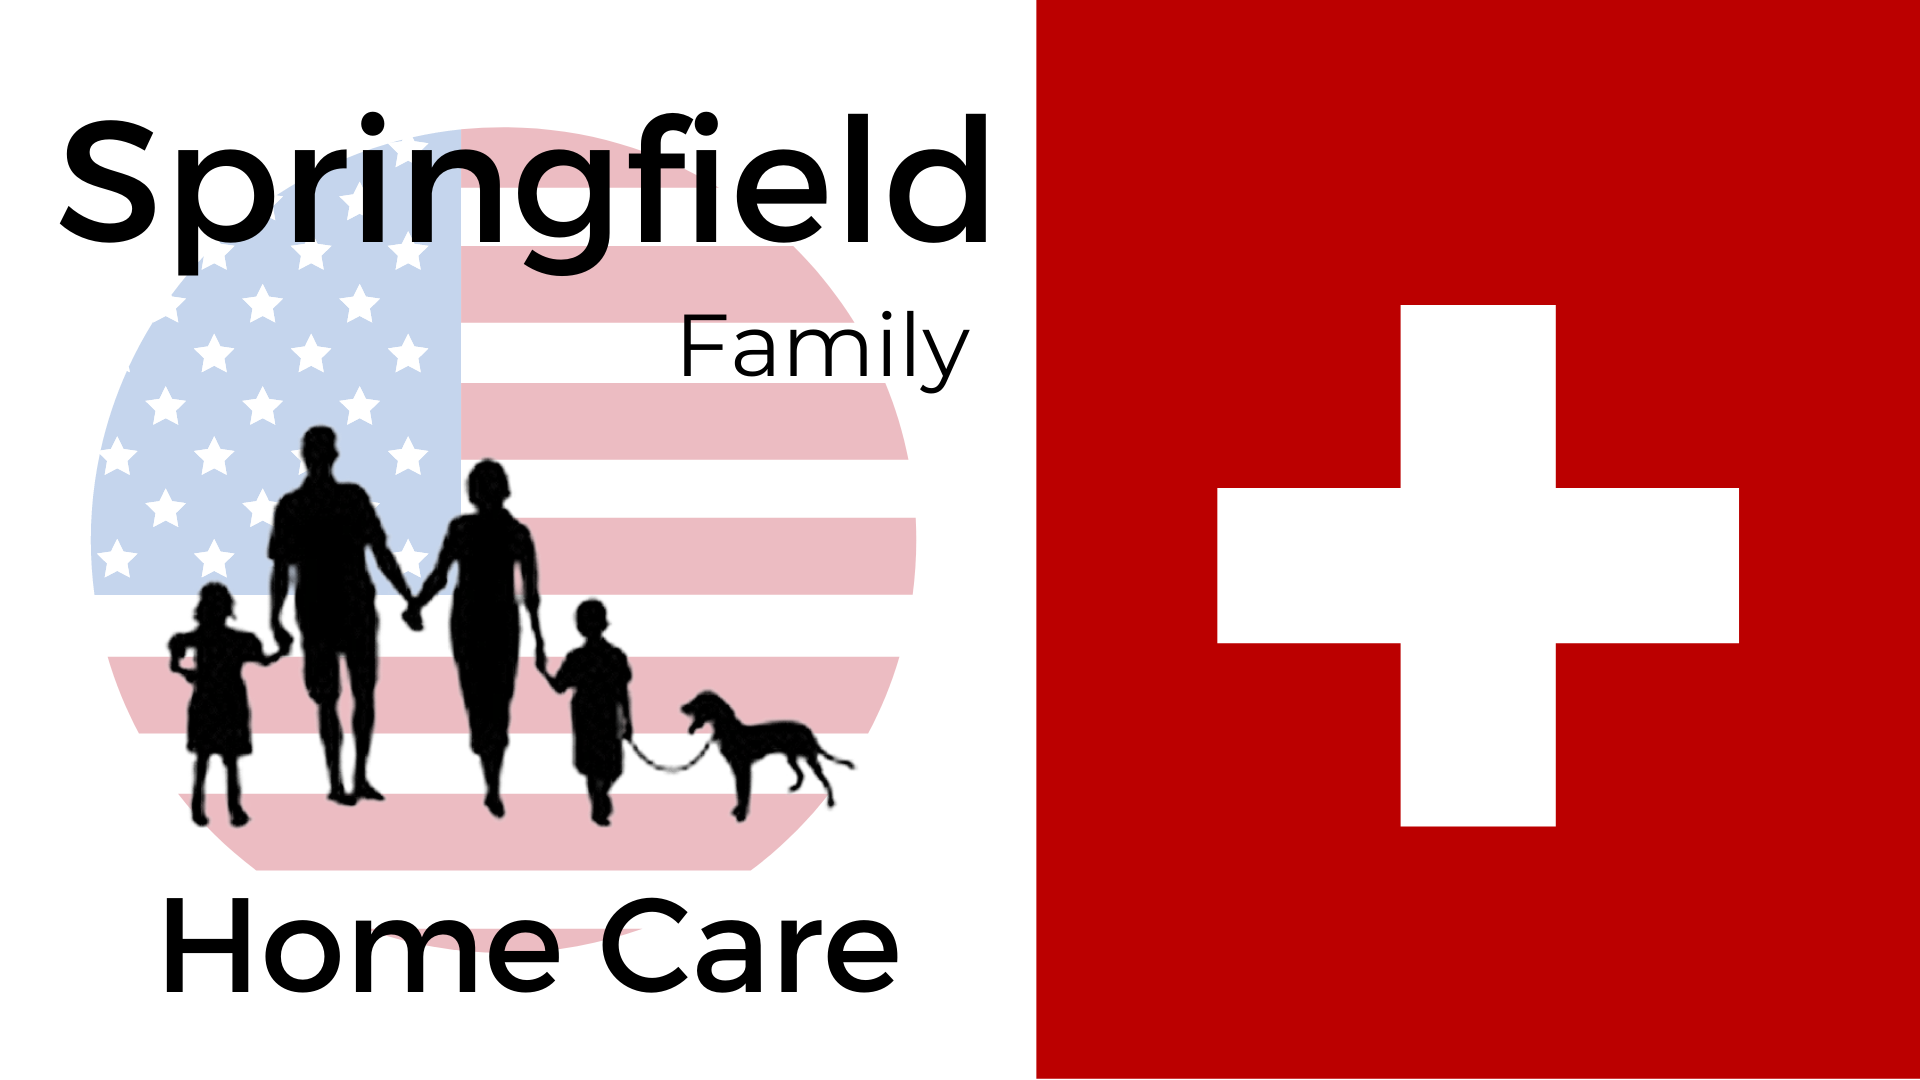 Springfield Family Home Care